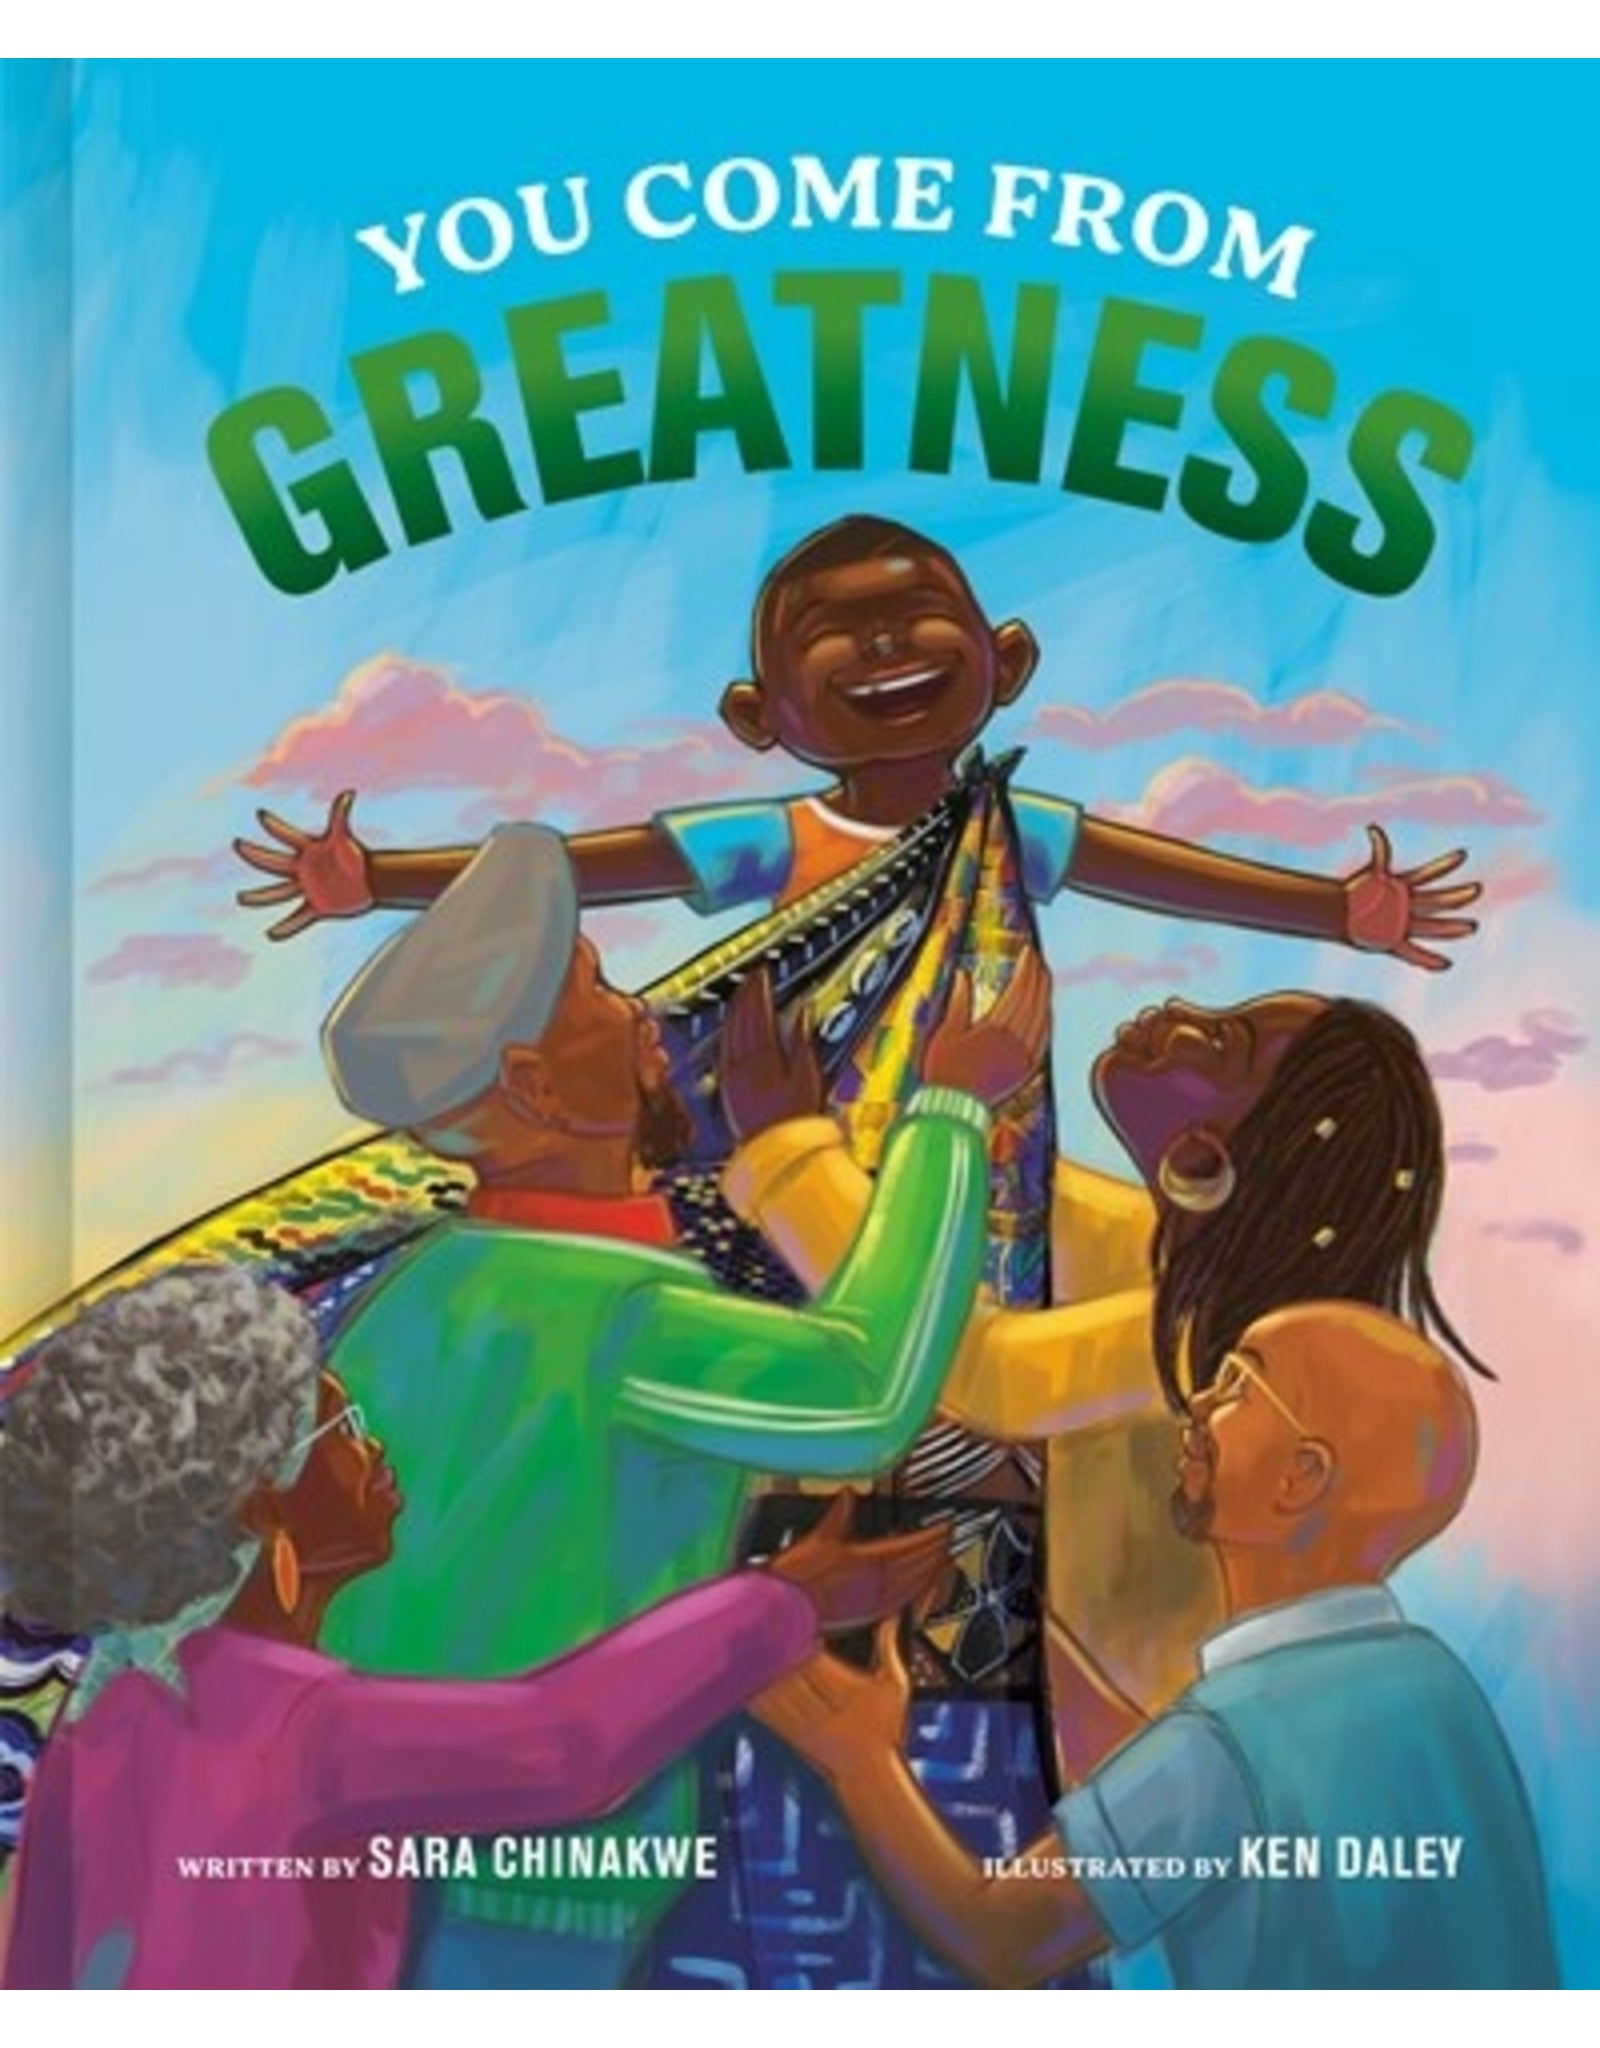 Books You Come From GREATNESS  written by Sara Chinakwe  Illustrated by Ken Daley